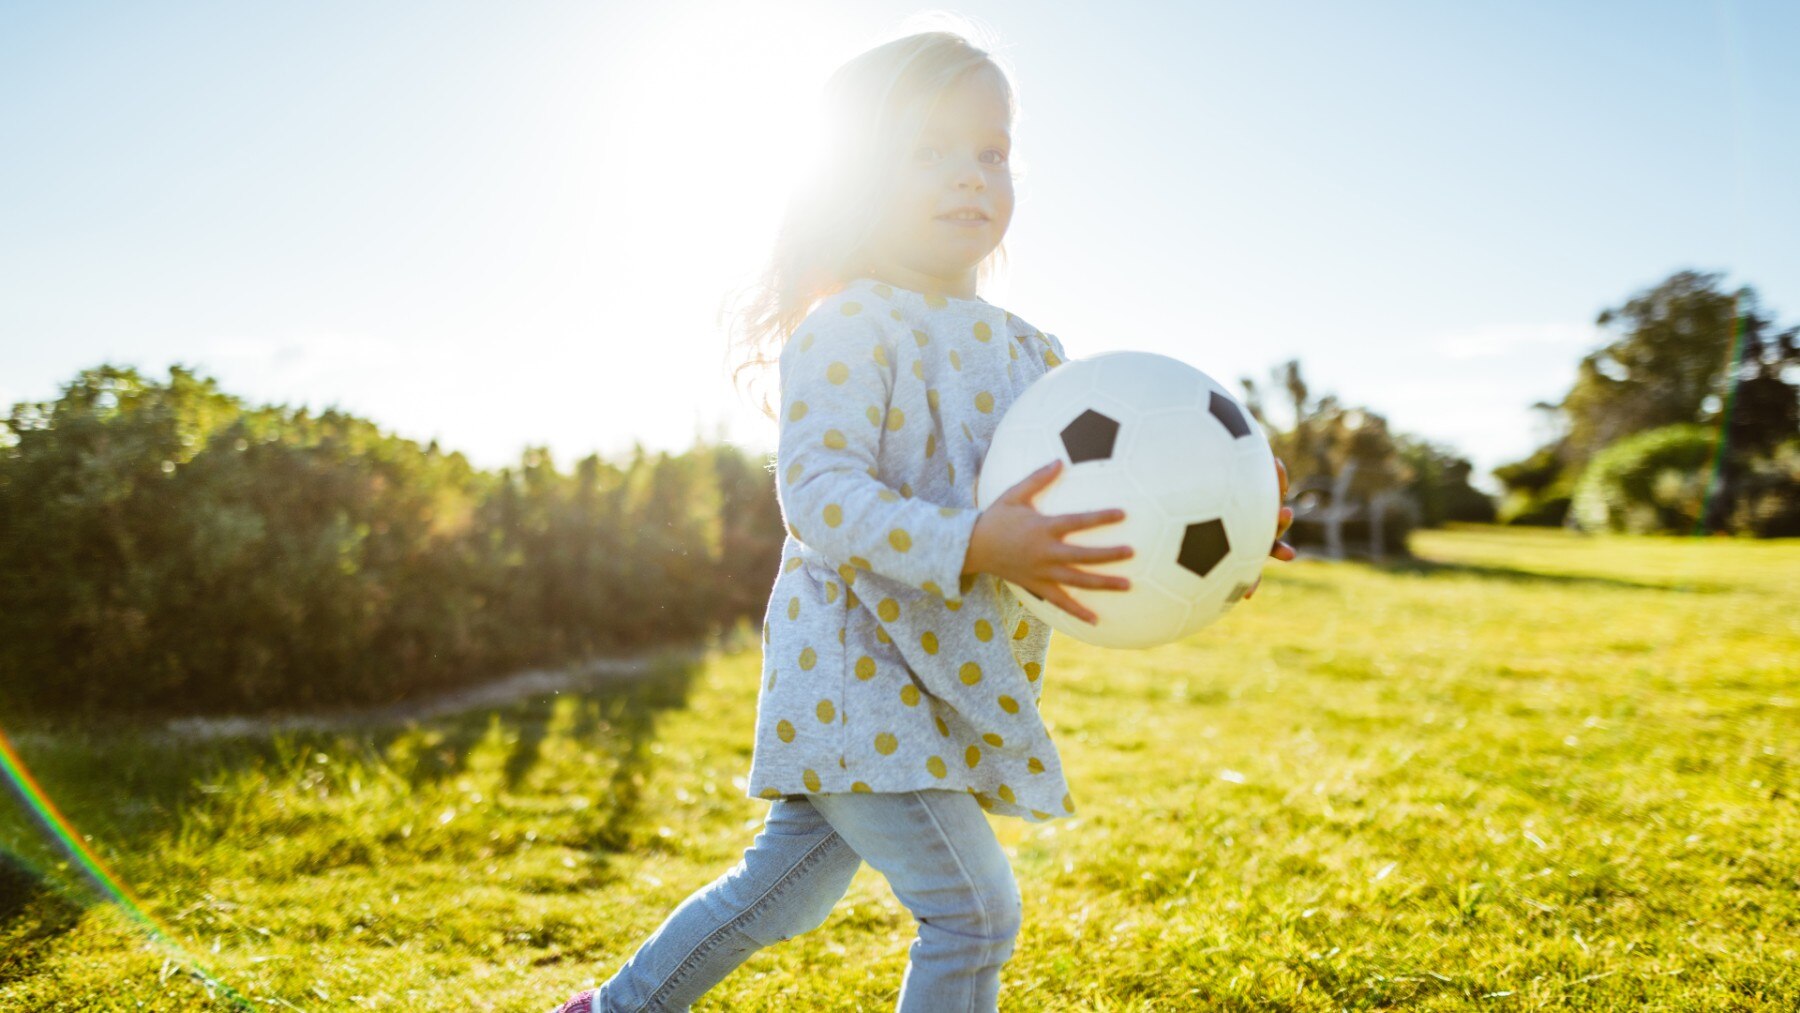 Child with soccer ball